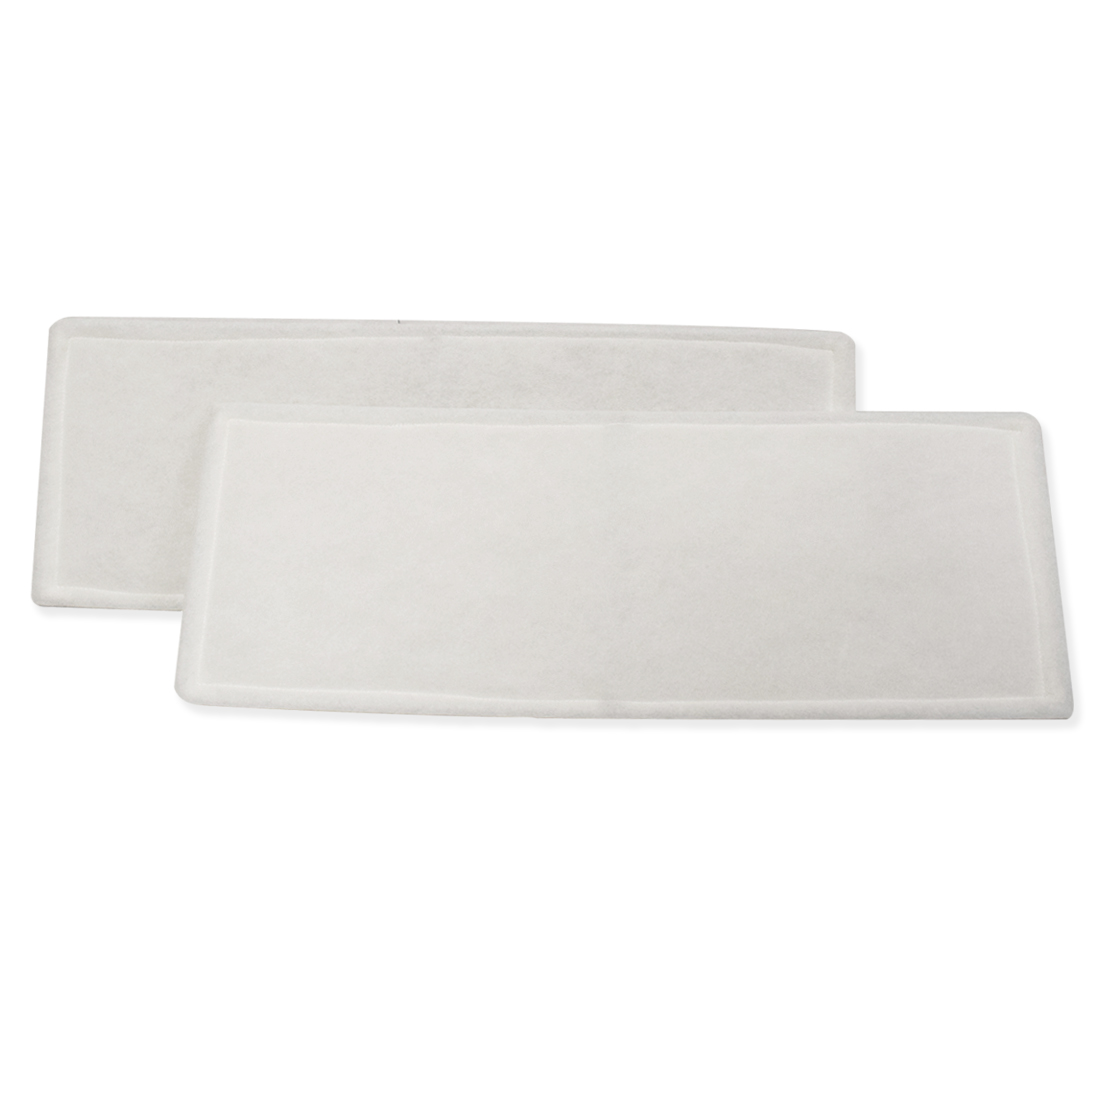 Replacement 2 x G4 Filters for Airflow BV400 Heat Recovery Unit